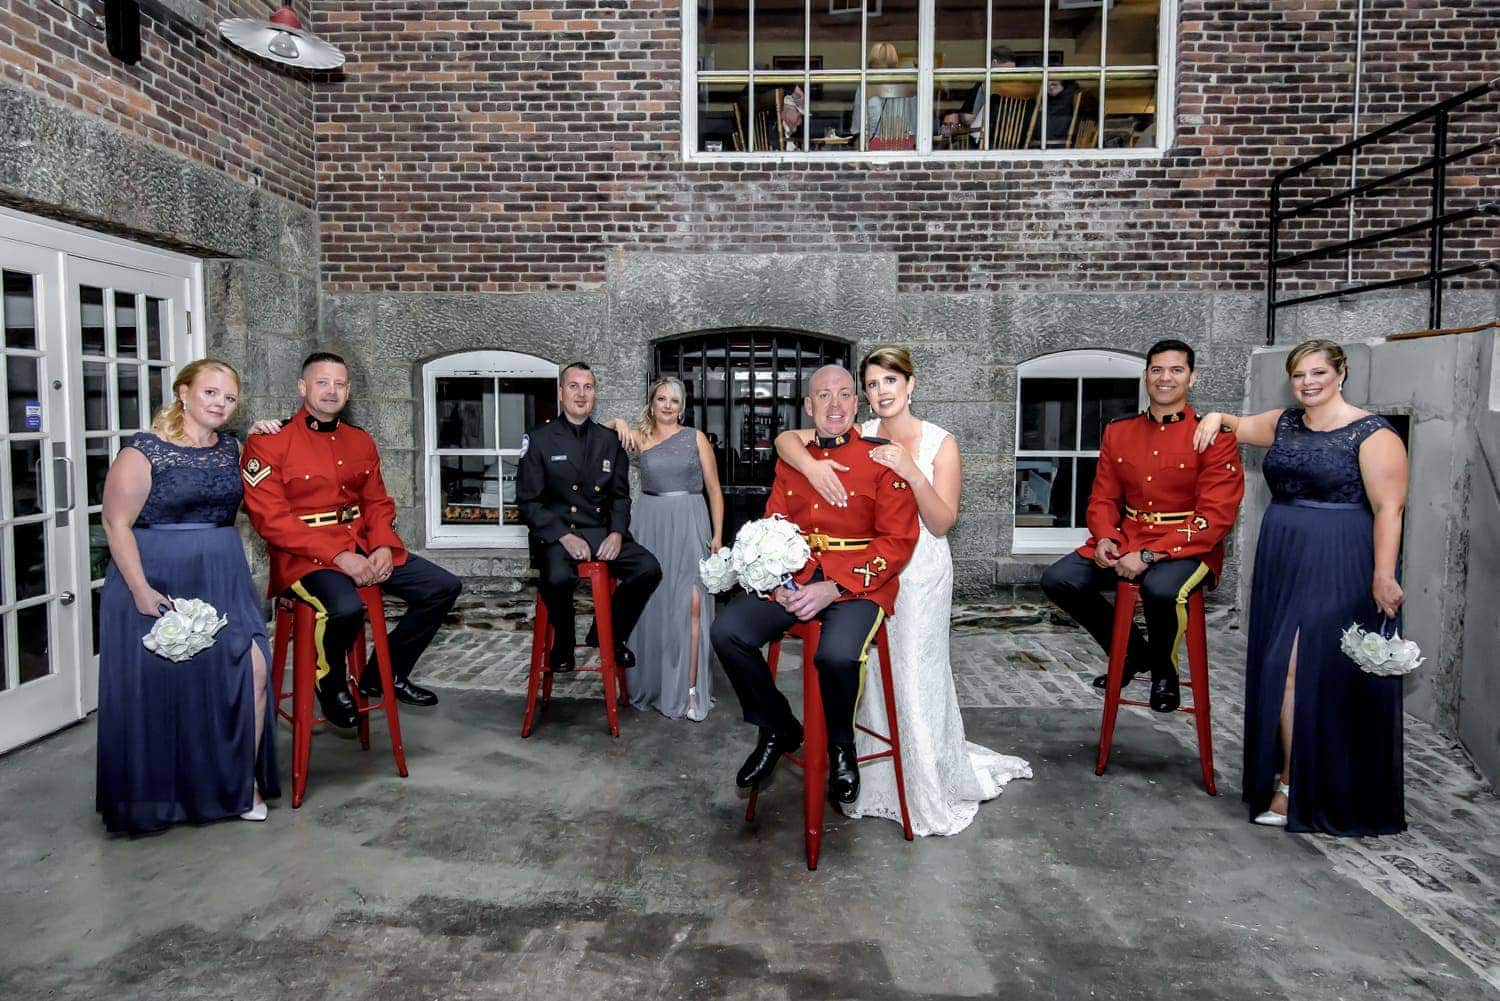 RCMP groom with bride and wedding party photos at Alexander Keiths Brewey in Halifax.